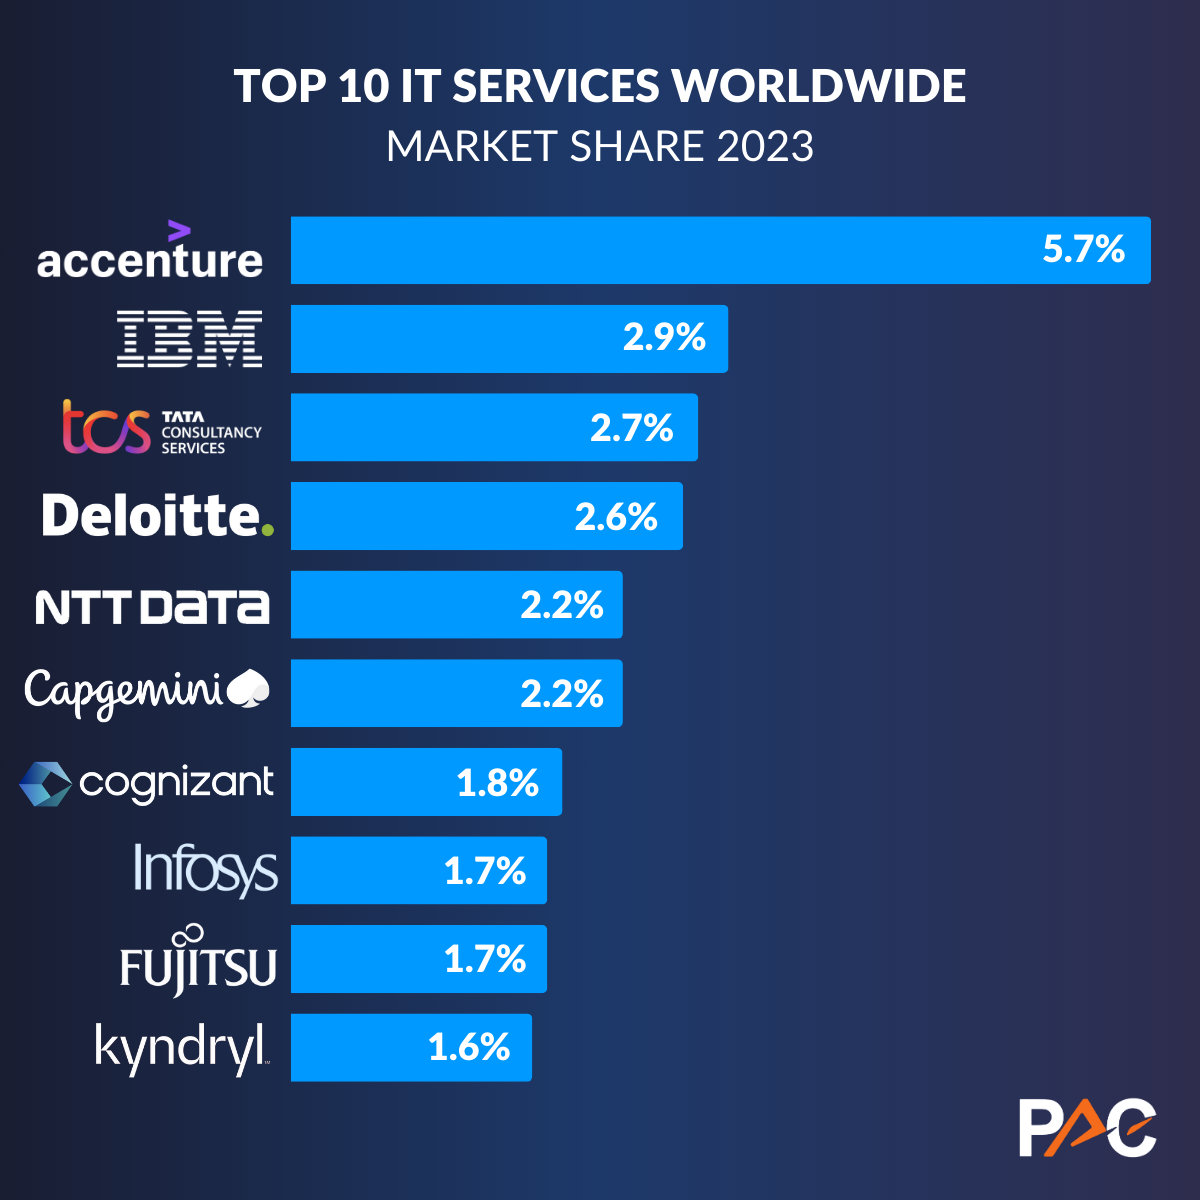 Top 10 IT Services worldwide